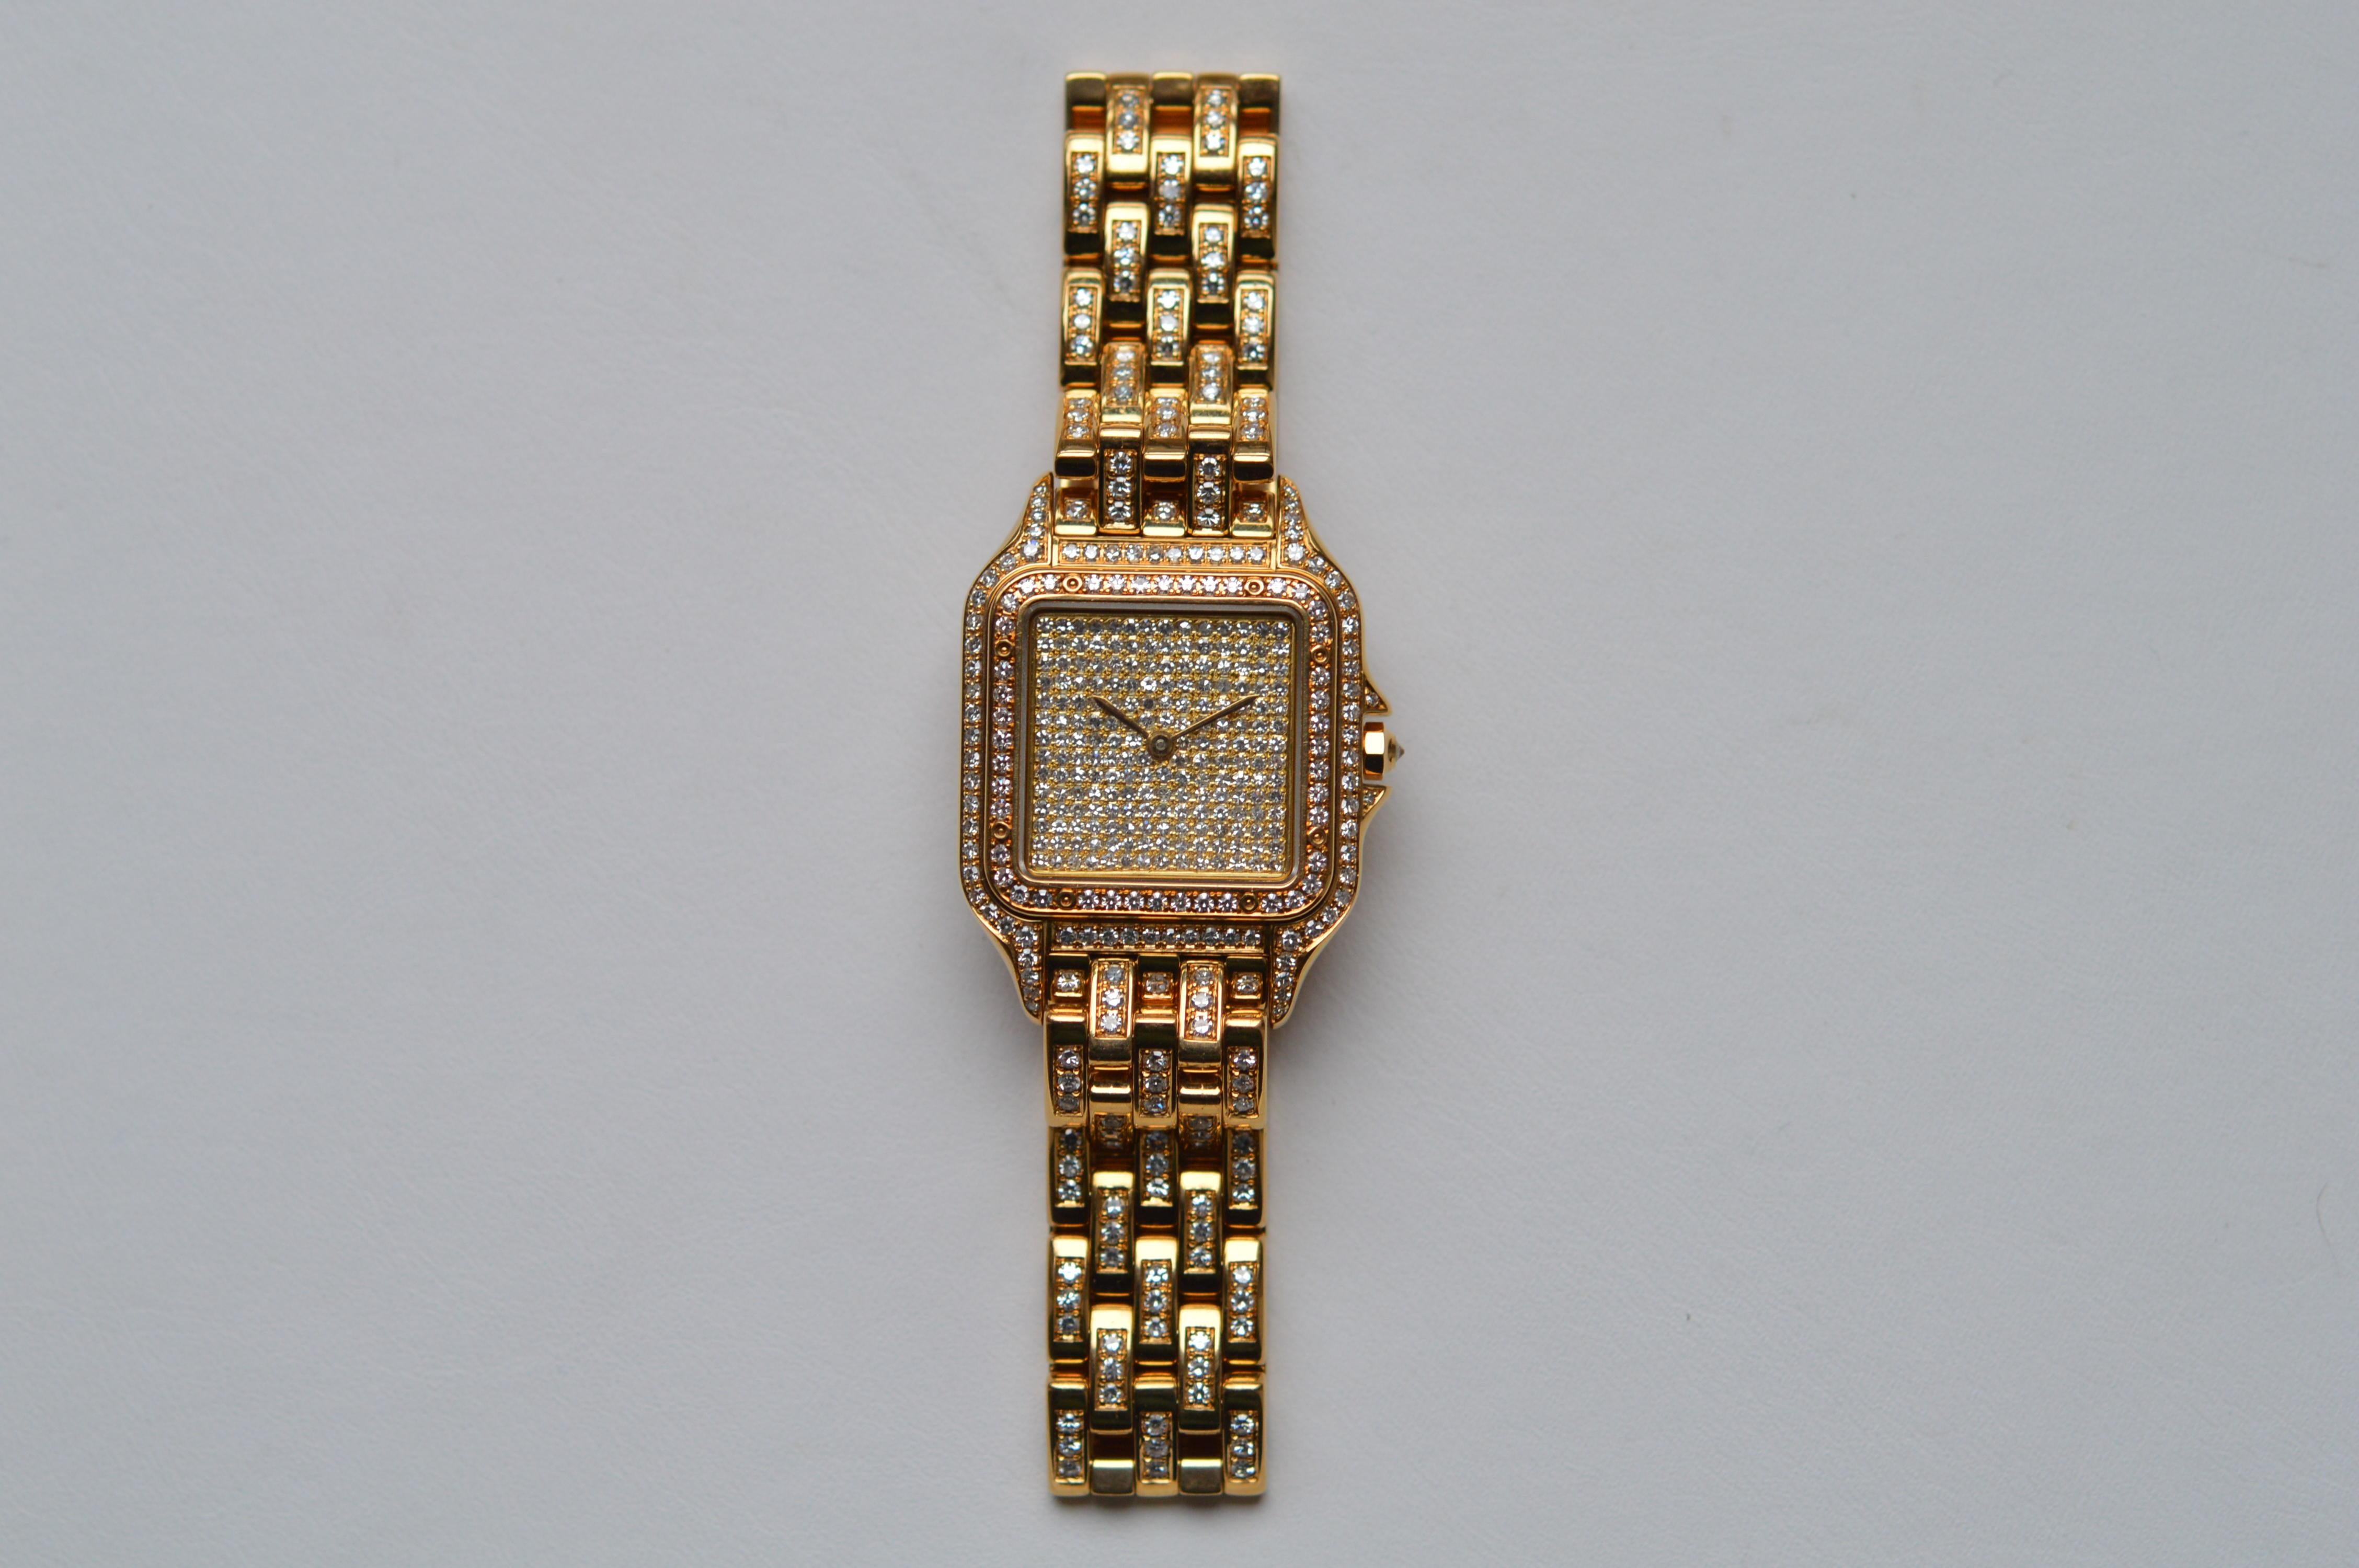 Cartier Panthère Full Diamond pavé
Reference n°882728FF
GM (Grand Model) Size
26mm X 36mm Size
18K Yellow Gold
Diamond paved dial
Custom Diamond Setting
Set with 575 Round Diamond for a total weight of 5.18 carats
Quartz Movement
Brand new never